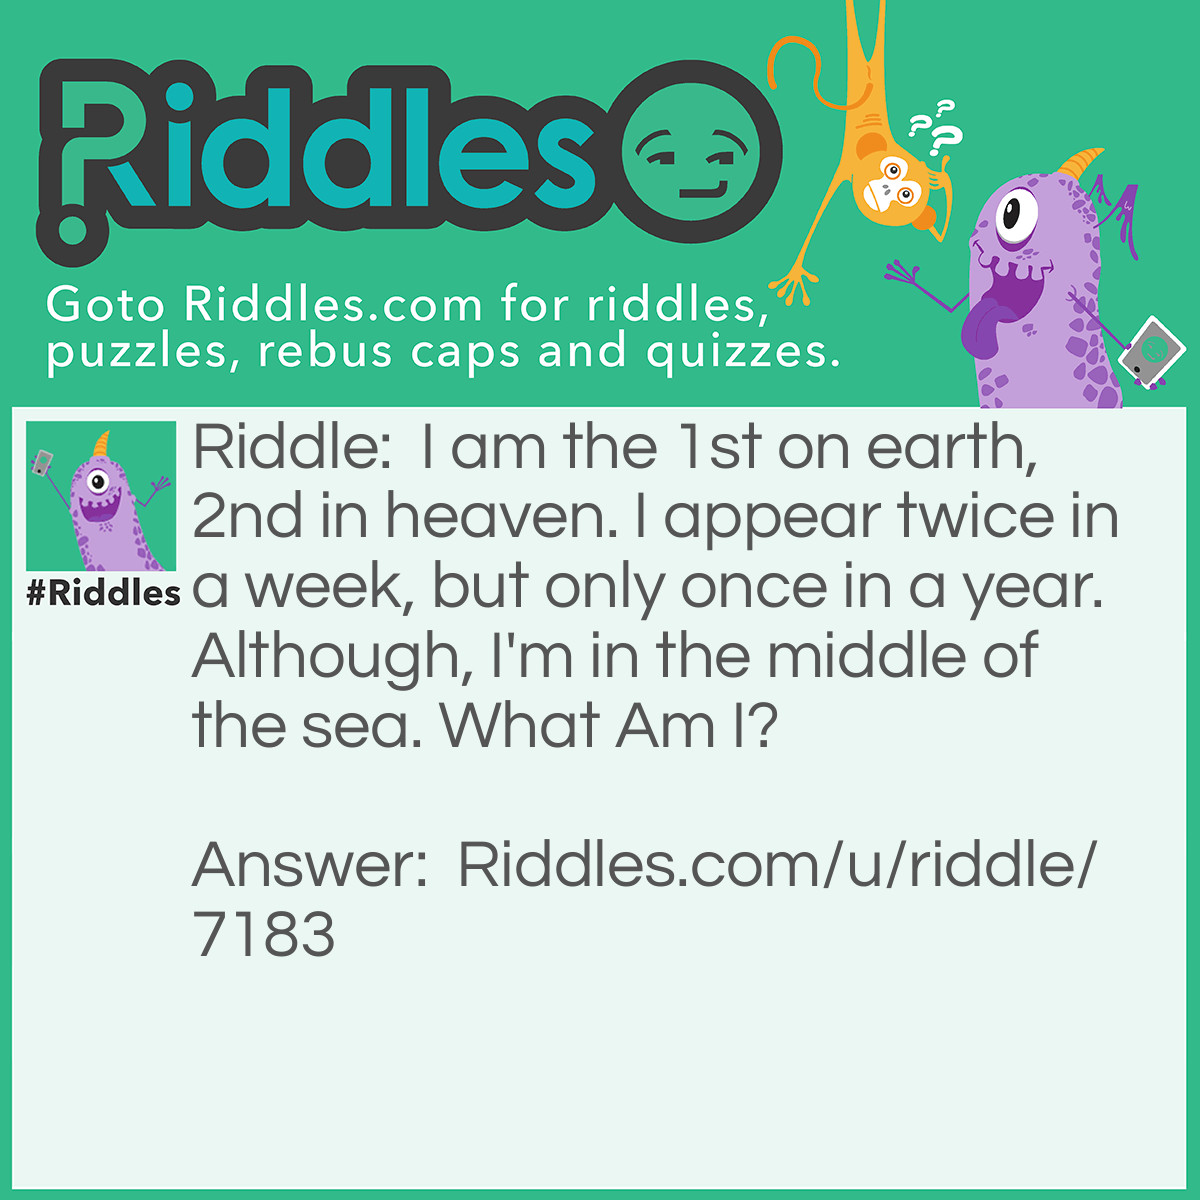 Riddle: I am the 1st on earth, 2nd in heaven. I appear twice in a week, but only once in a year. Although, I'm in the middle of the sea. What Am I? Answer: The letter E.